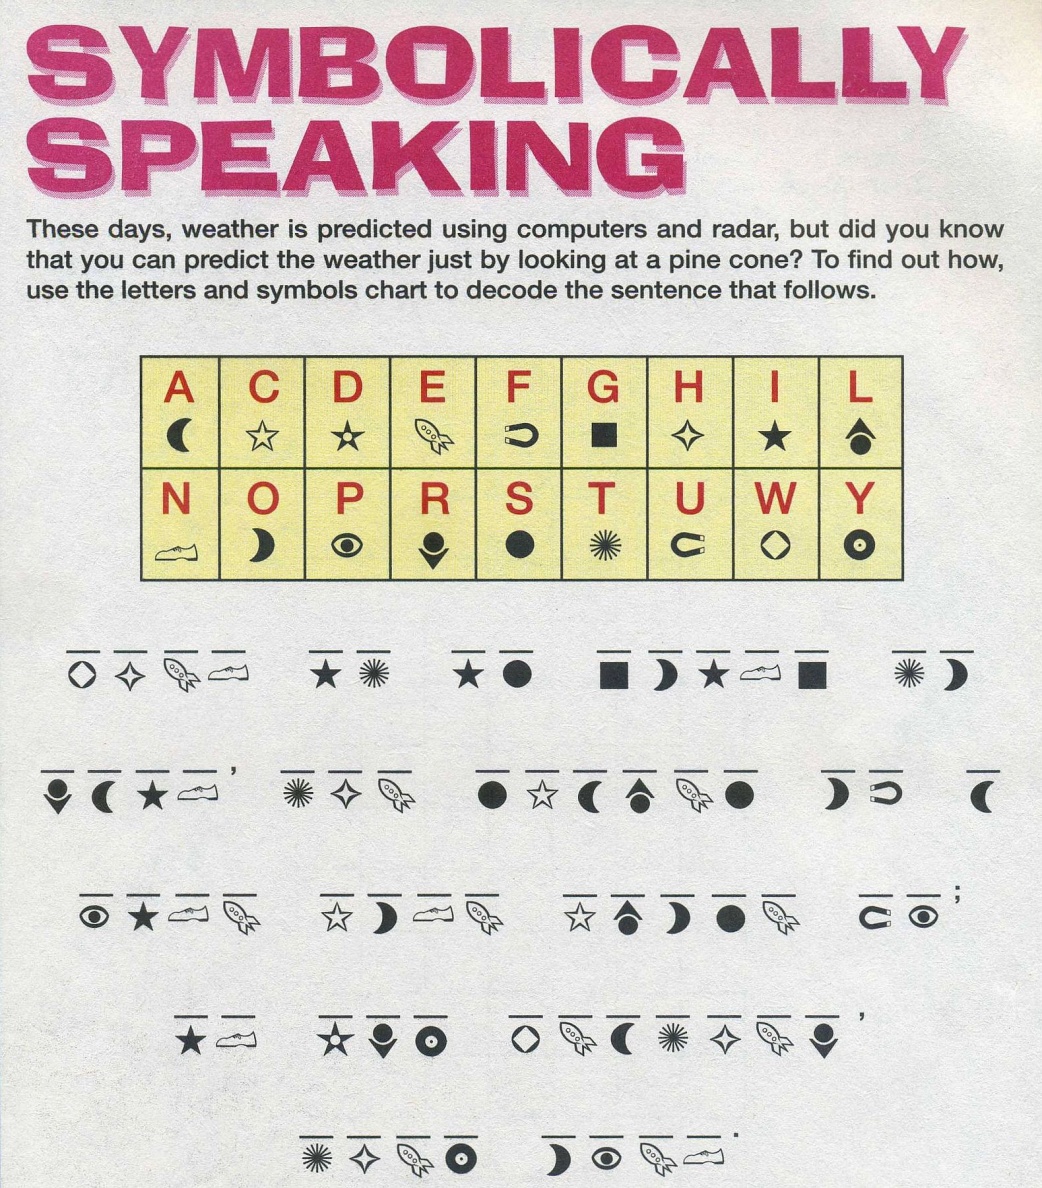 Coded puzzle; chart shows corresponding symbol for each letter; 